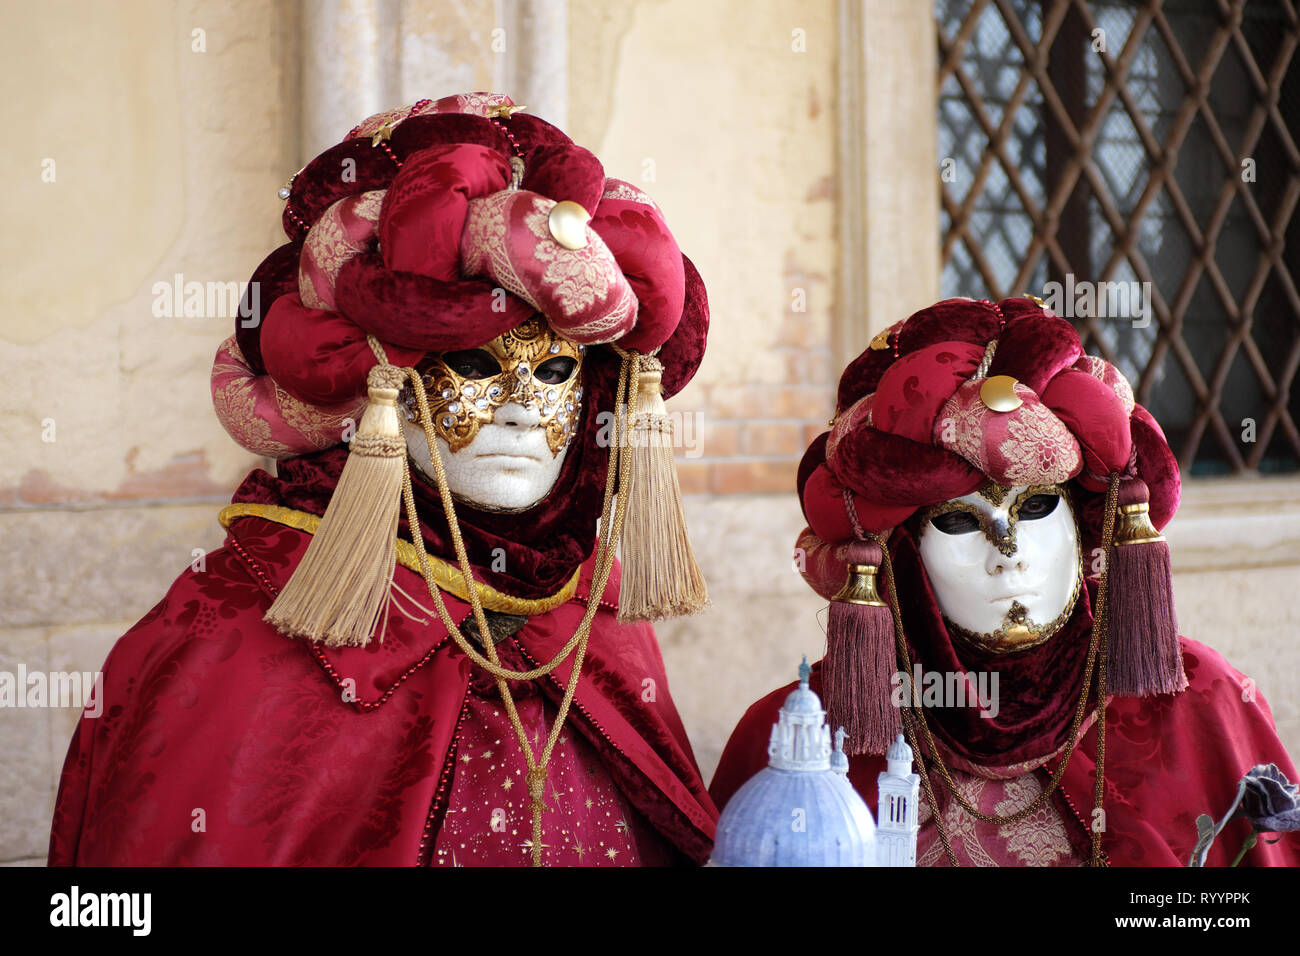 Man and woman dressed in traditional mask and costume for Venice Carnival standing under arch at Doge’s Palace, Piazza San Marco, Venice, Veneto, Ital Stock Photo